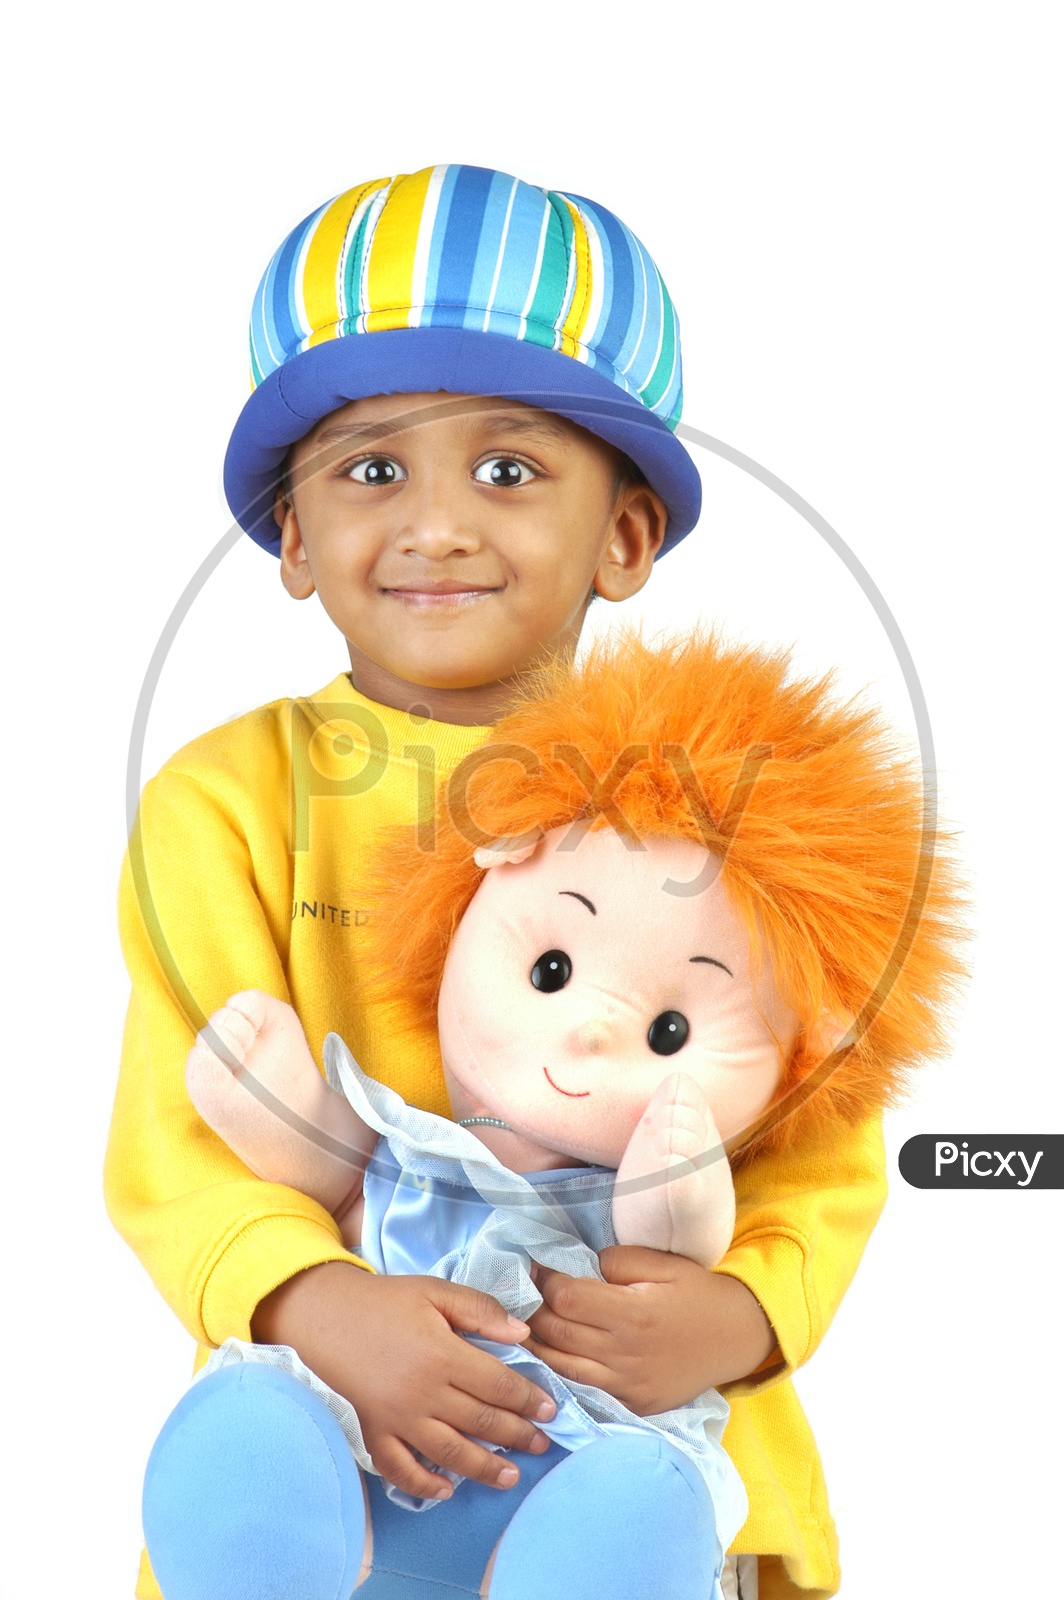 Indian boy wearing yellow t-shirt playing with toy